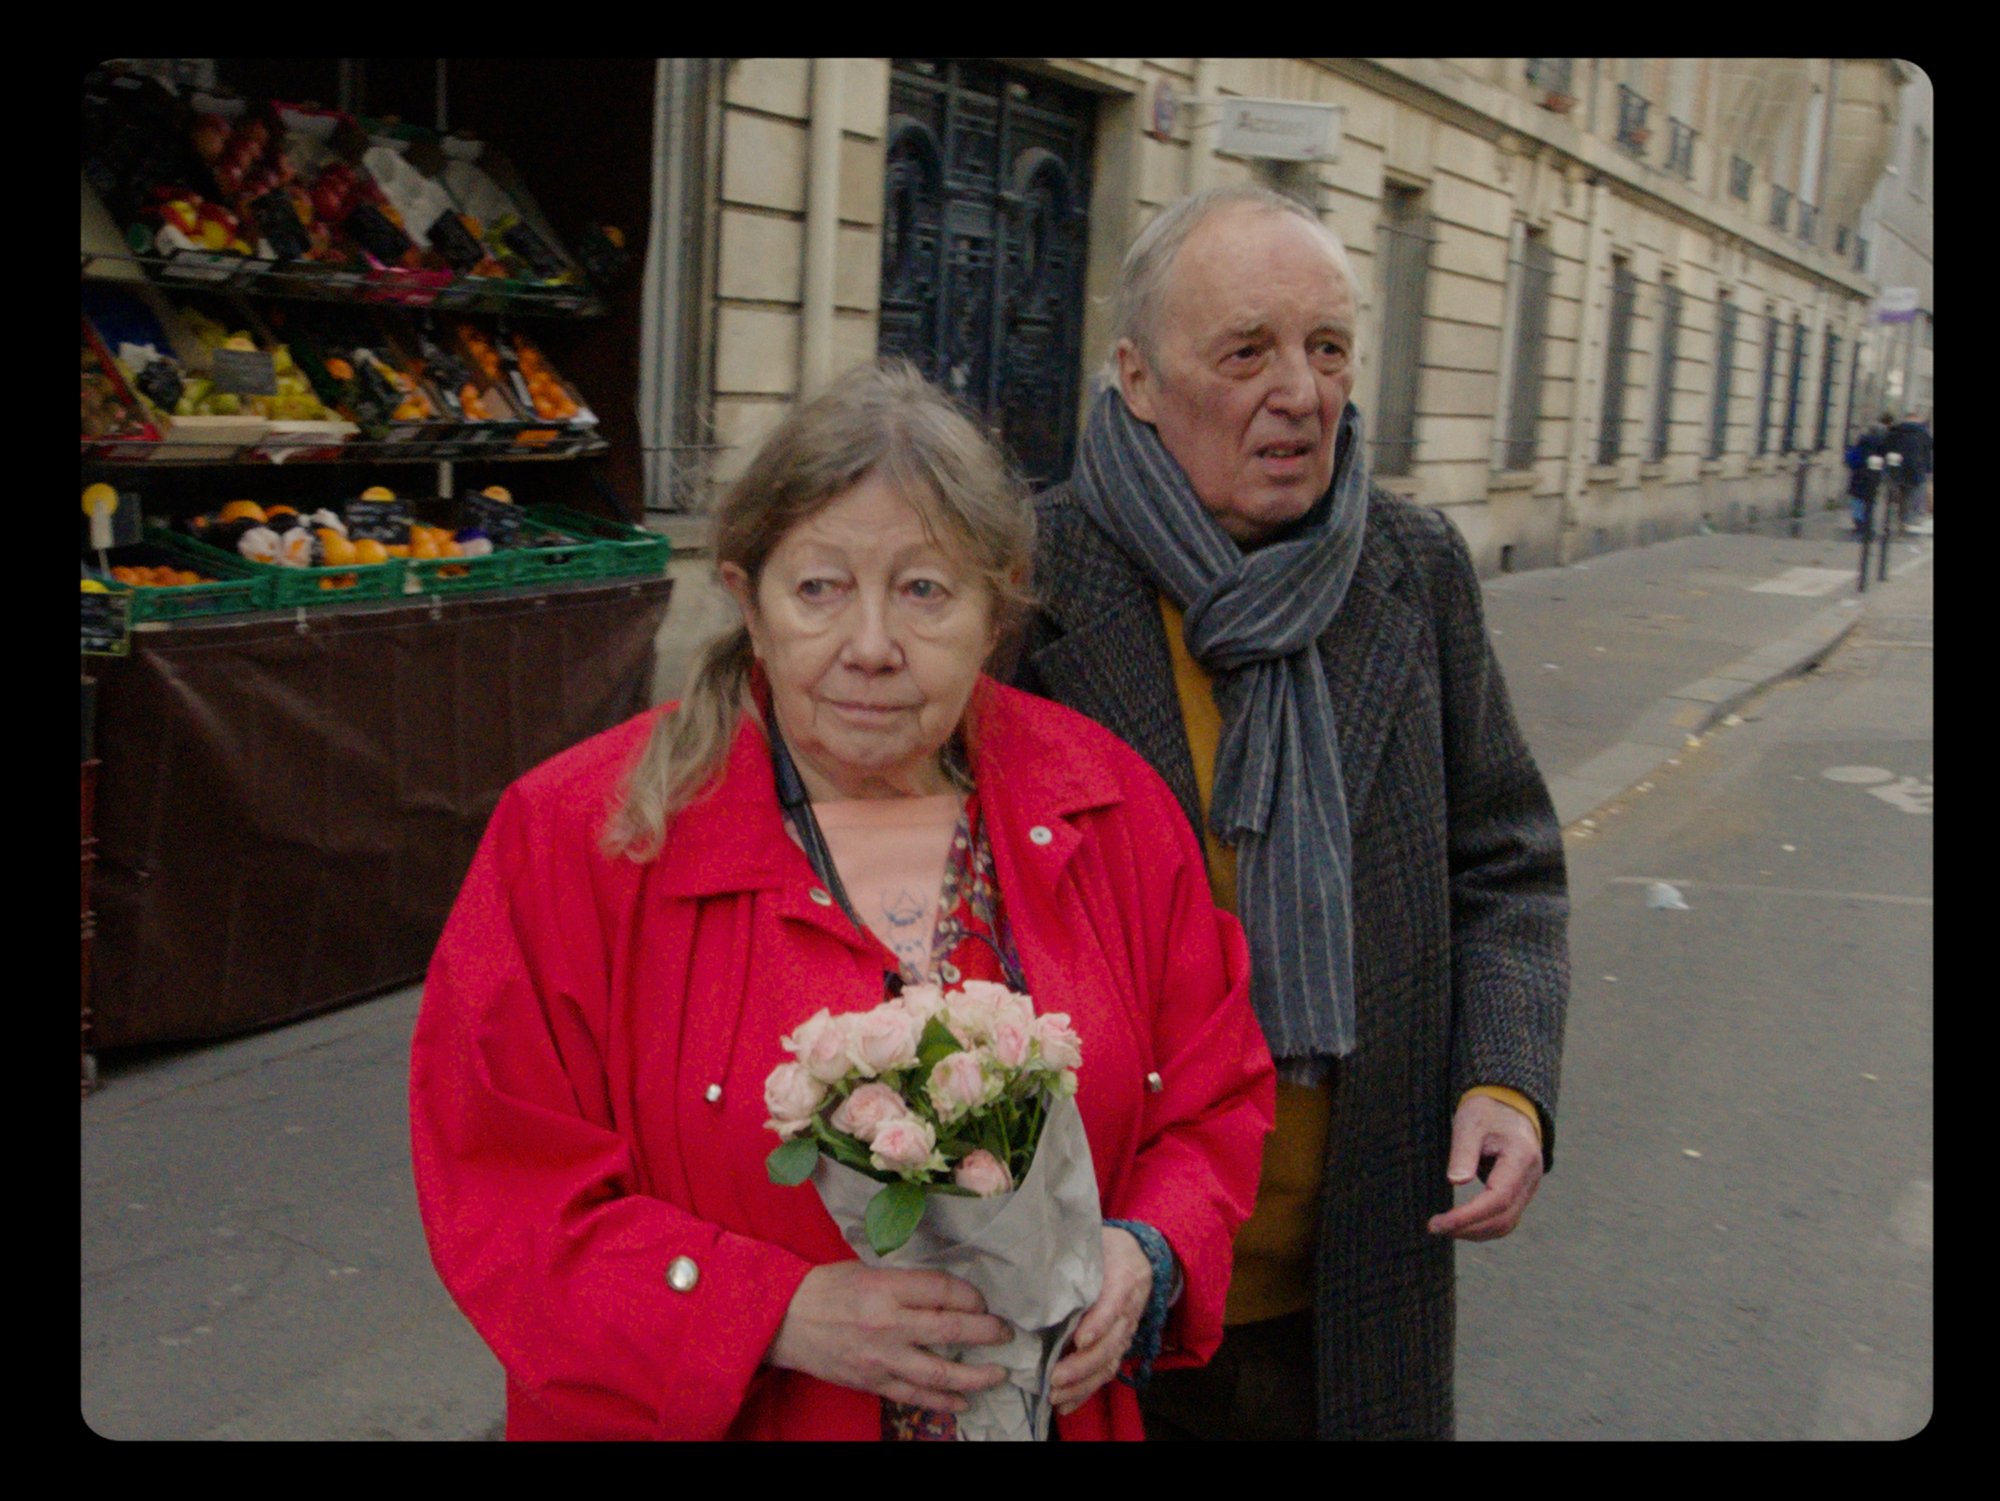 'Vortex' Françoise Lebrun as Elle and Dario Argento as Lui with Lebrun holding flowers in a red jacket walking into the street in front of a store